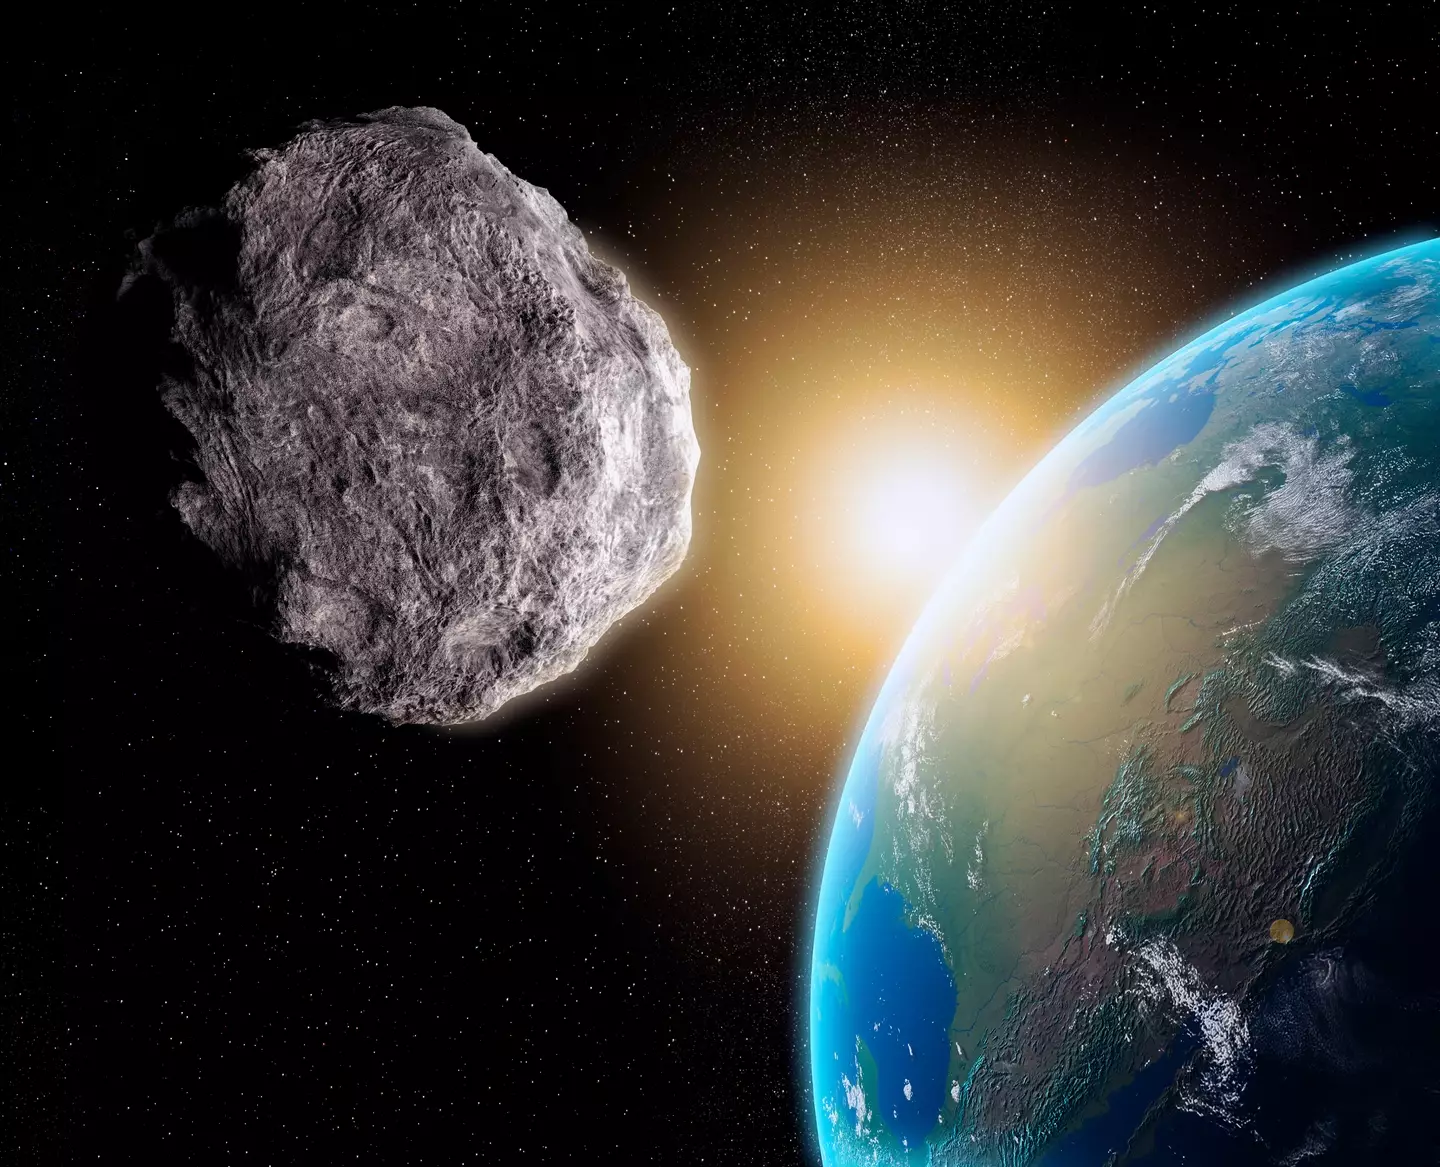 Professor Martin Barstow explained why people shouldn’t worry about the upcoming asteroid, however.